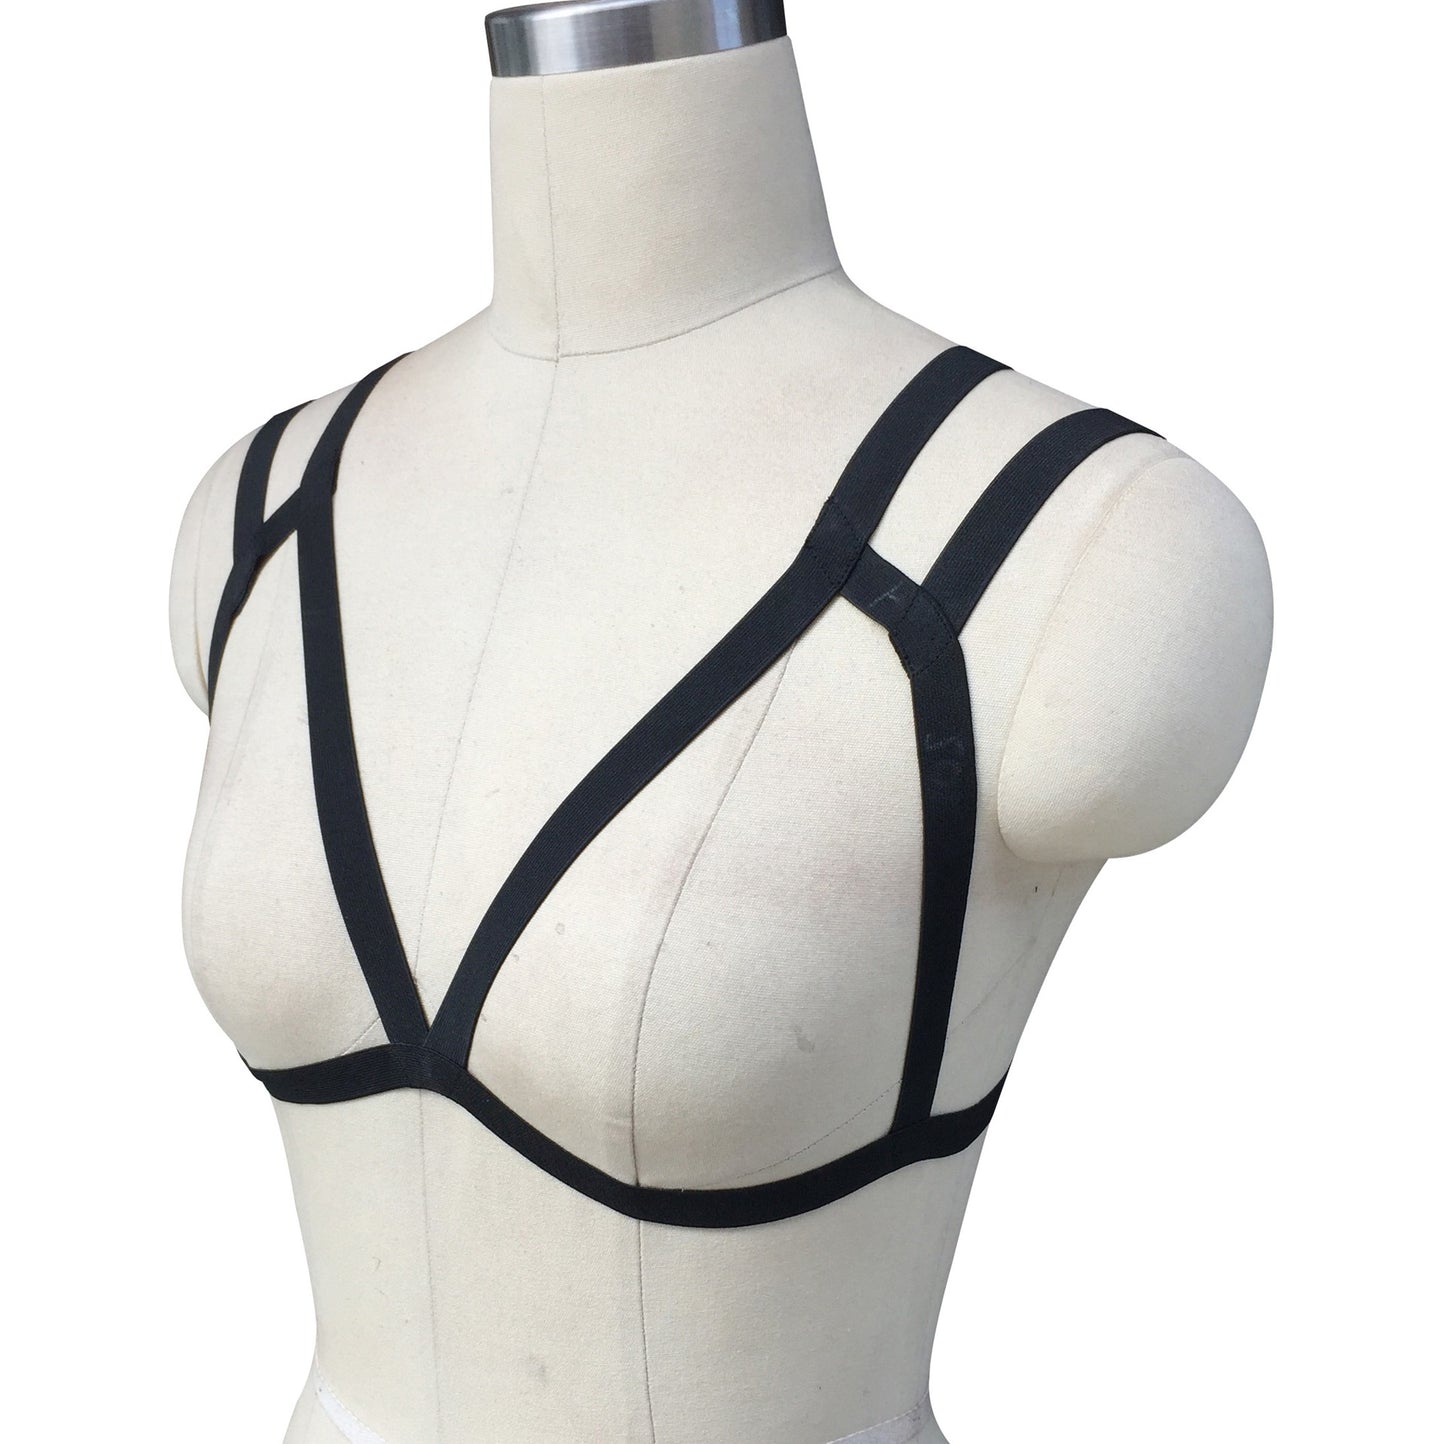 Chubby Harness Bra Submissive Bdsm Lingerie Harness